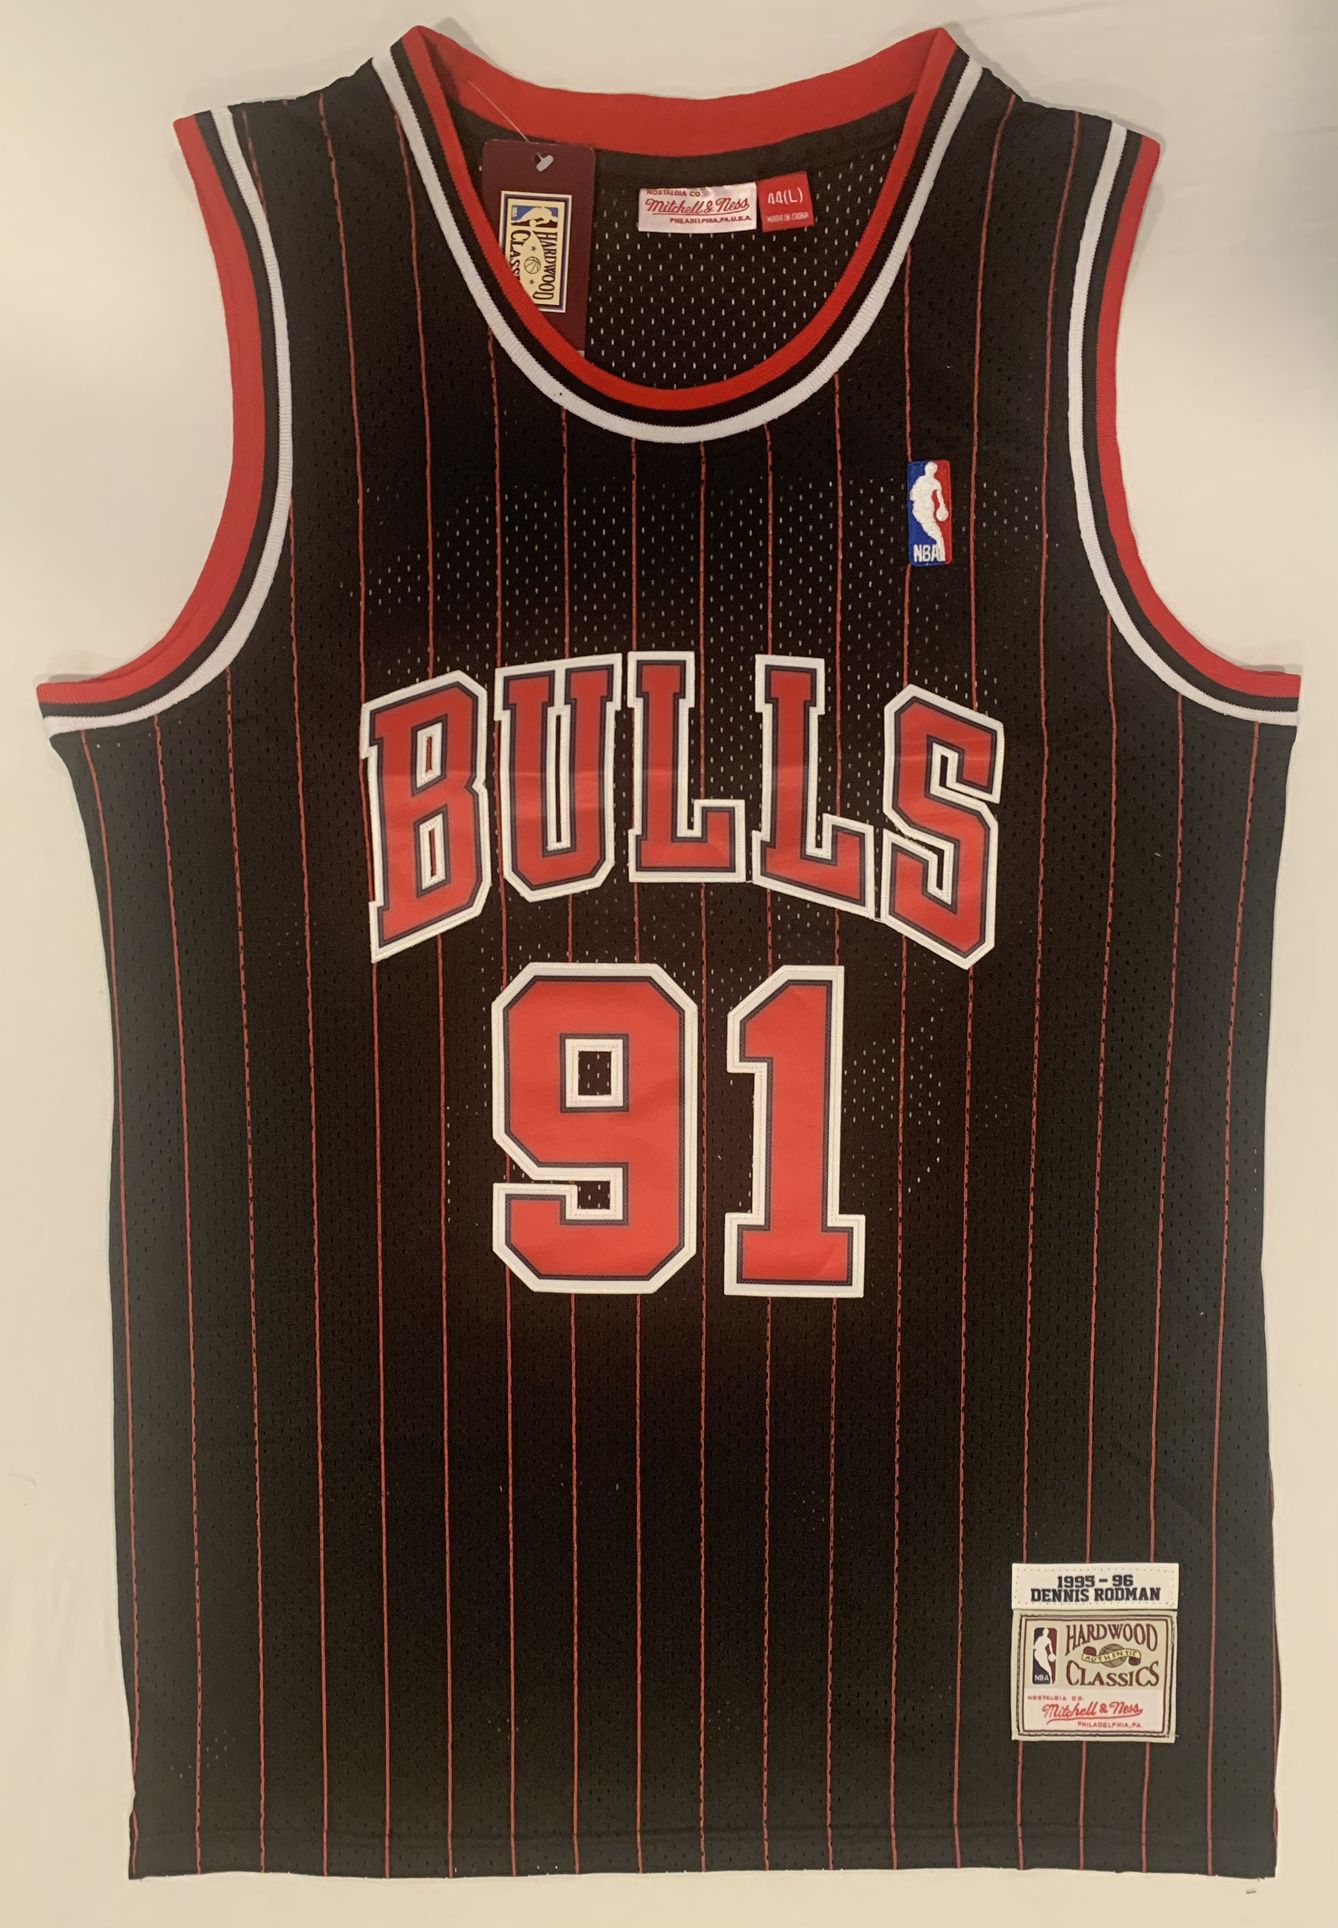 bulls jersey for sale